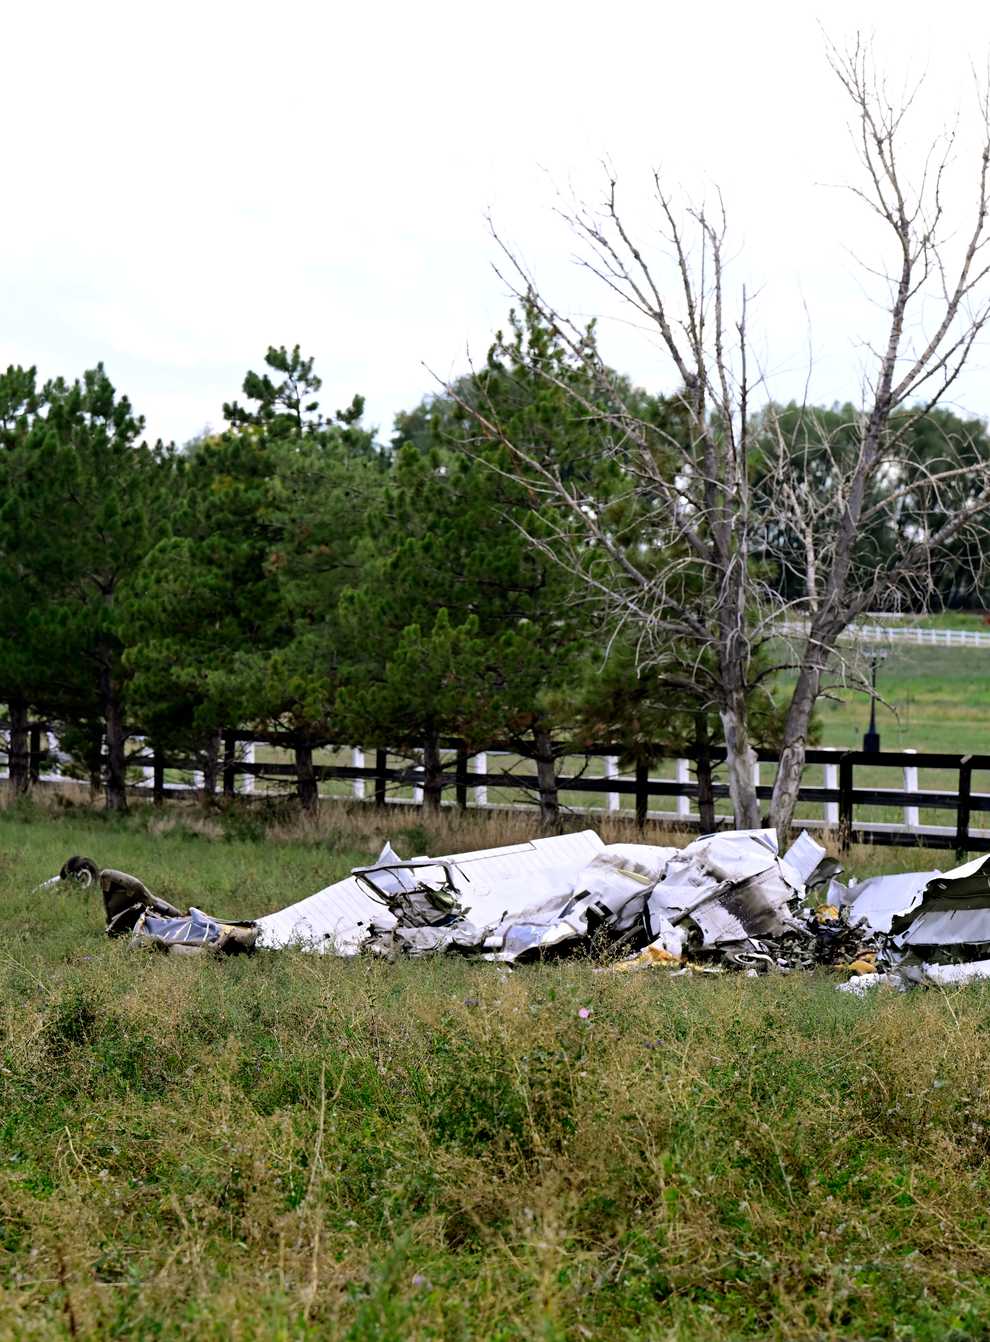 A crashed plane, one of two, lies along Niwot Road between Highway 287 and N 95th Street in Longmont, Colorado (Andy Cross/The Denver Post via AP)